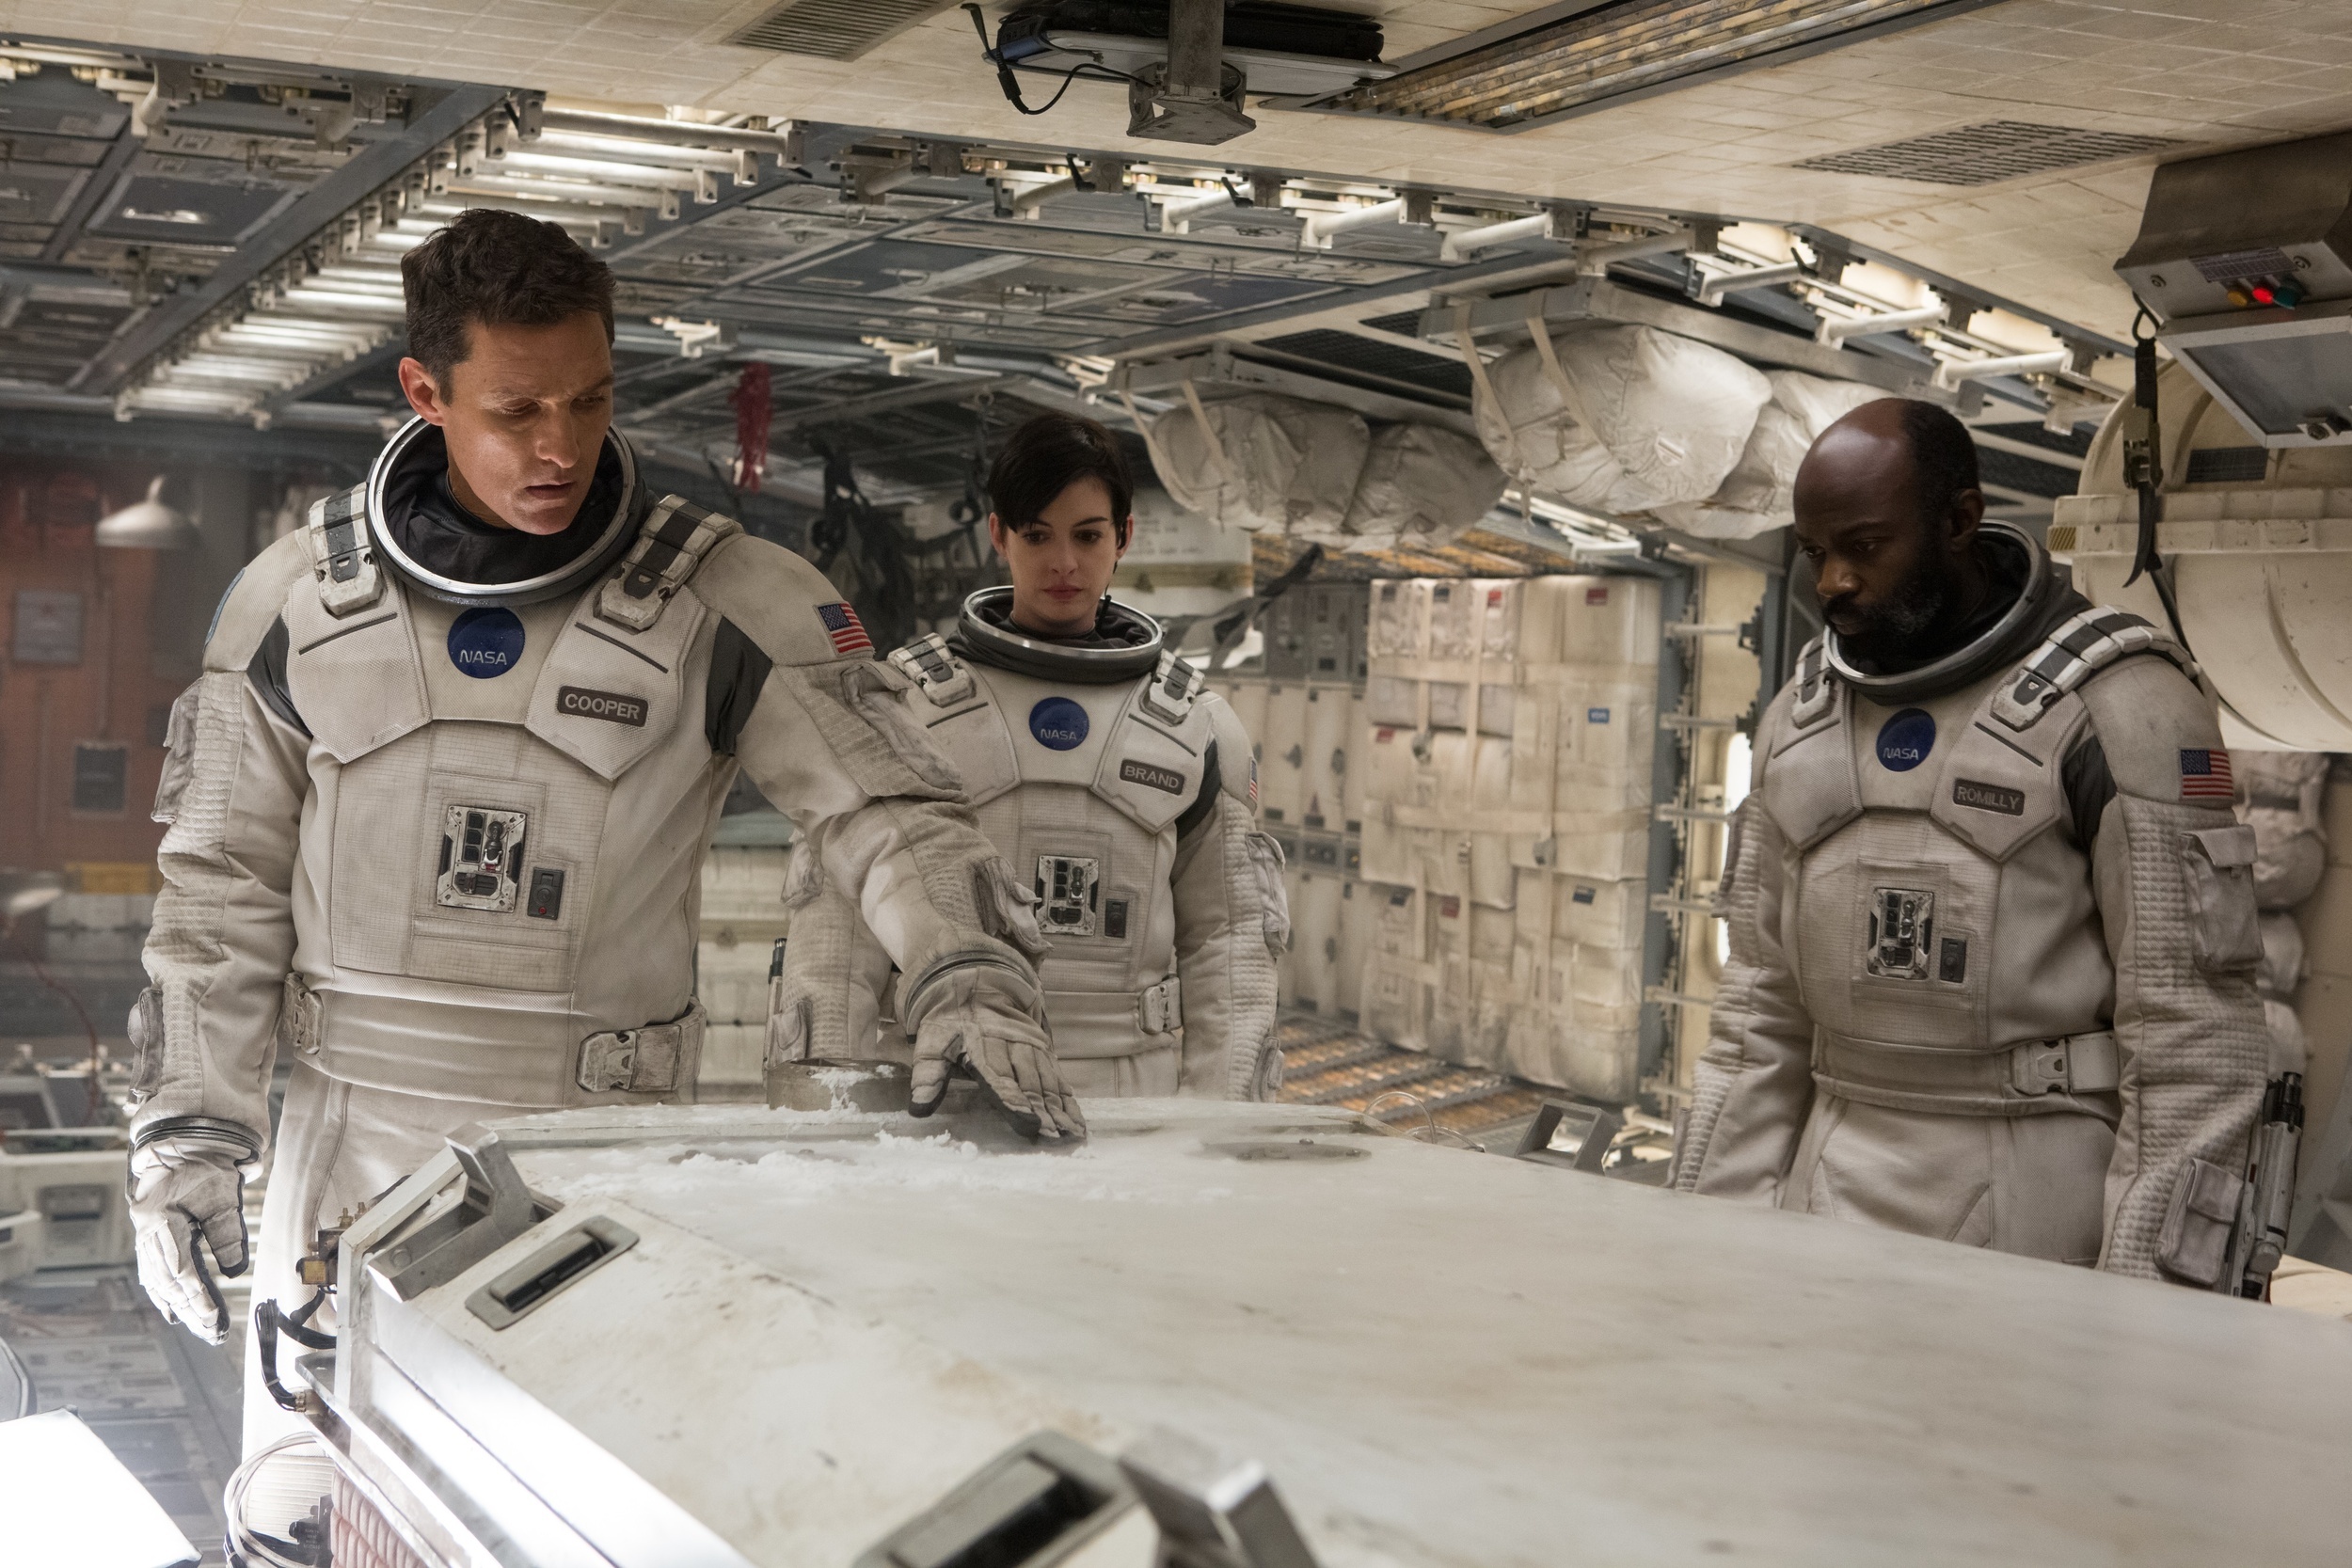 <p>Christopher Nolan produced some of his finest work in <span><em>Interstellar</em>, </span>which managed to combine an emotionally rich and evocative storyline with some of the most astounding visuals to have emerged from Hollywood sci-fi filmmaking. Of particular <a href="https://recatalyst.org/3330/arts/how-interstellar-pushes-the-boundaries-of-science-and-fiction/#:~:text=Since%20wormholes%20are%20theoretical%2C%20there,film's%20depictions%20over%20existing%20models."><span>note is its depiction of a black hole,</span></a> which is astonishingly accurate. The level of scientific sophistication in the film dovetails with its rich human story. It focuses on several astronauts (played by <span>Matthew McConaughey and Anne Hathaway) who attempt to find a planet that can accommodate humanity since Earth has become almost uninhabitable. </span></p><p><a href='https://www.msn.com/en-us/community/channel/vid-cj9pqbr0vn9in2b6ddcd8sfgpfq6x6utp44fssrv6mc2gtybw0us'>Follow us on MSN to see more of our exclusive entertainment content.</a></p>